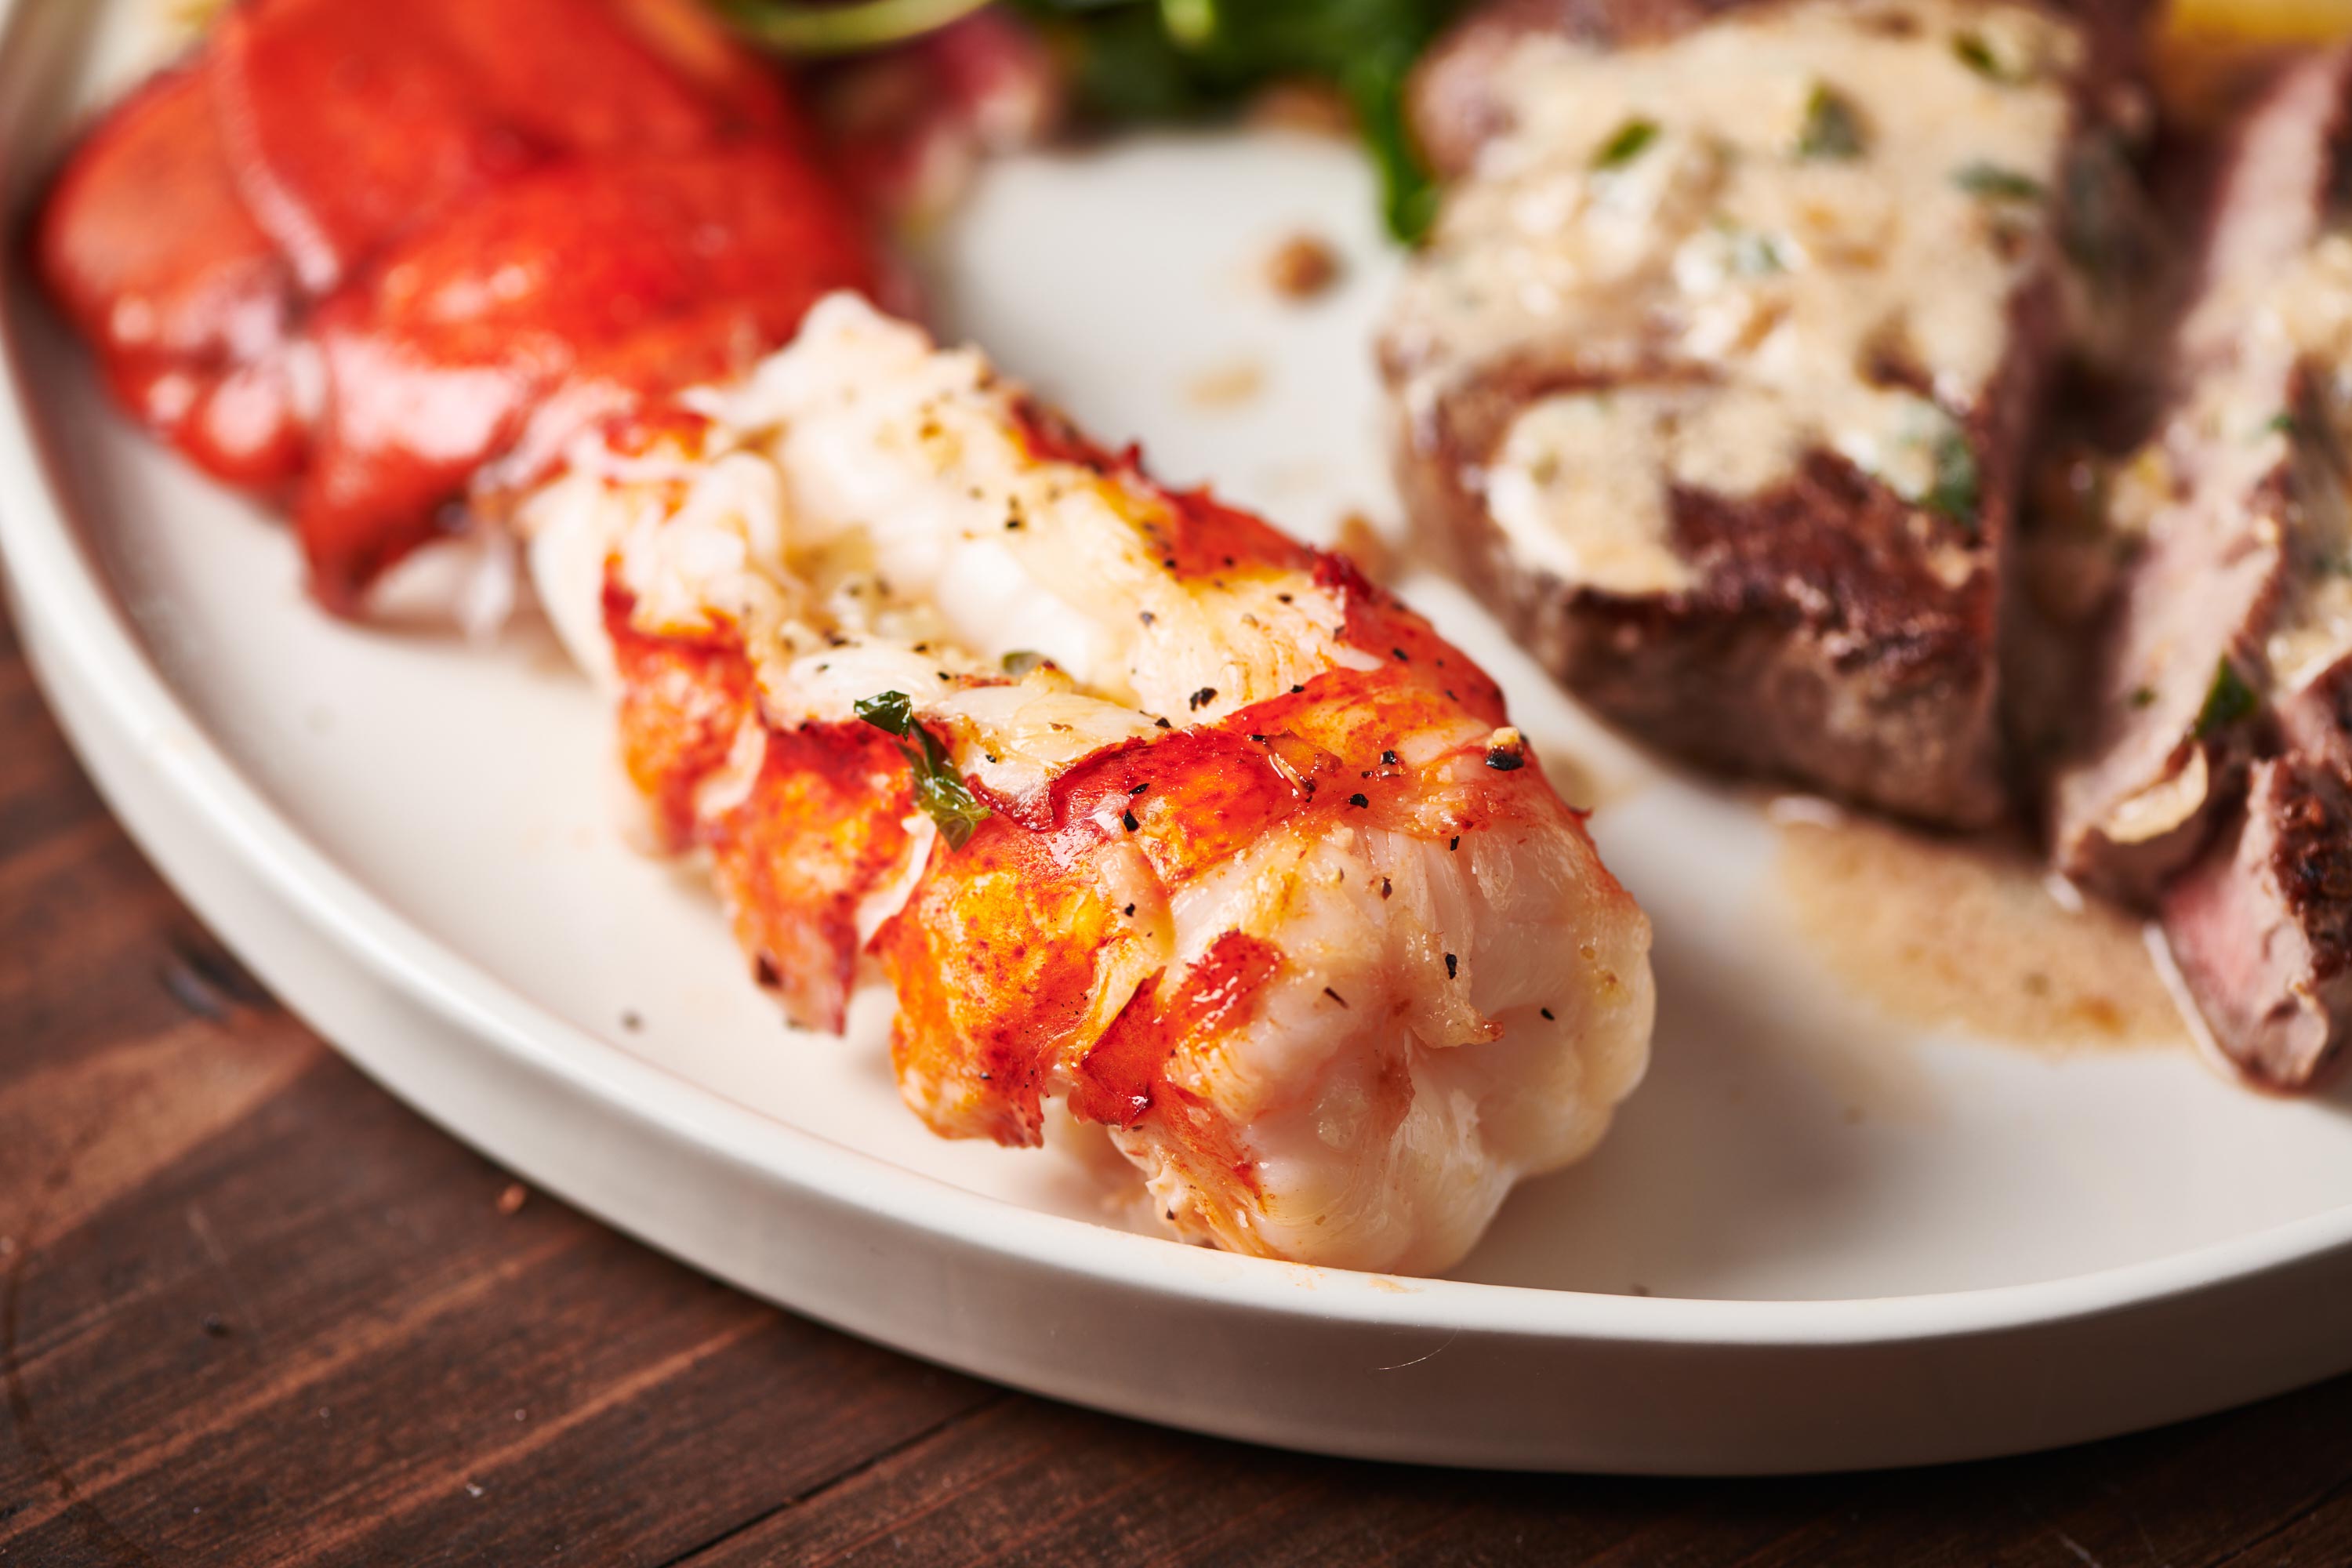 Shelled lobster tail on a plate.